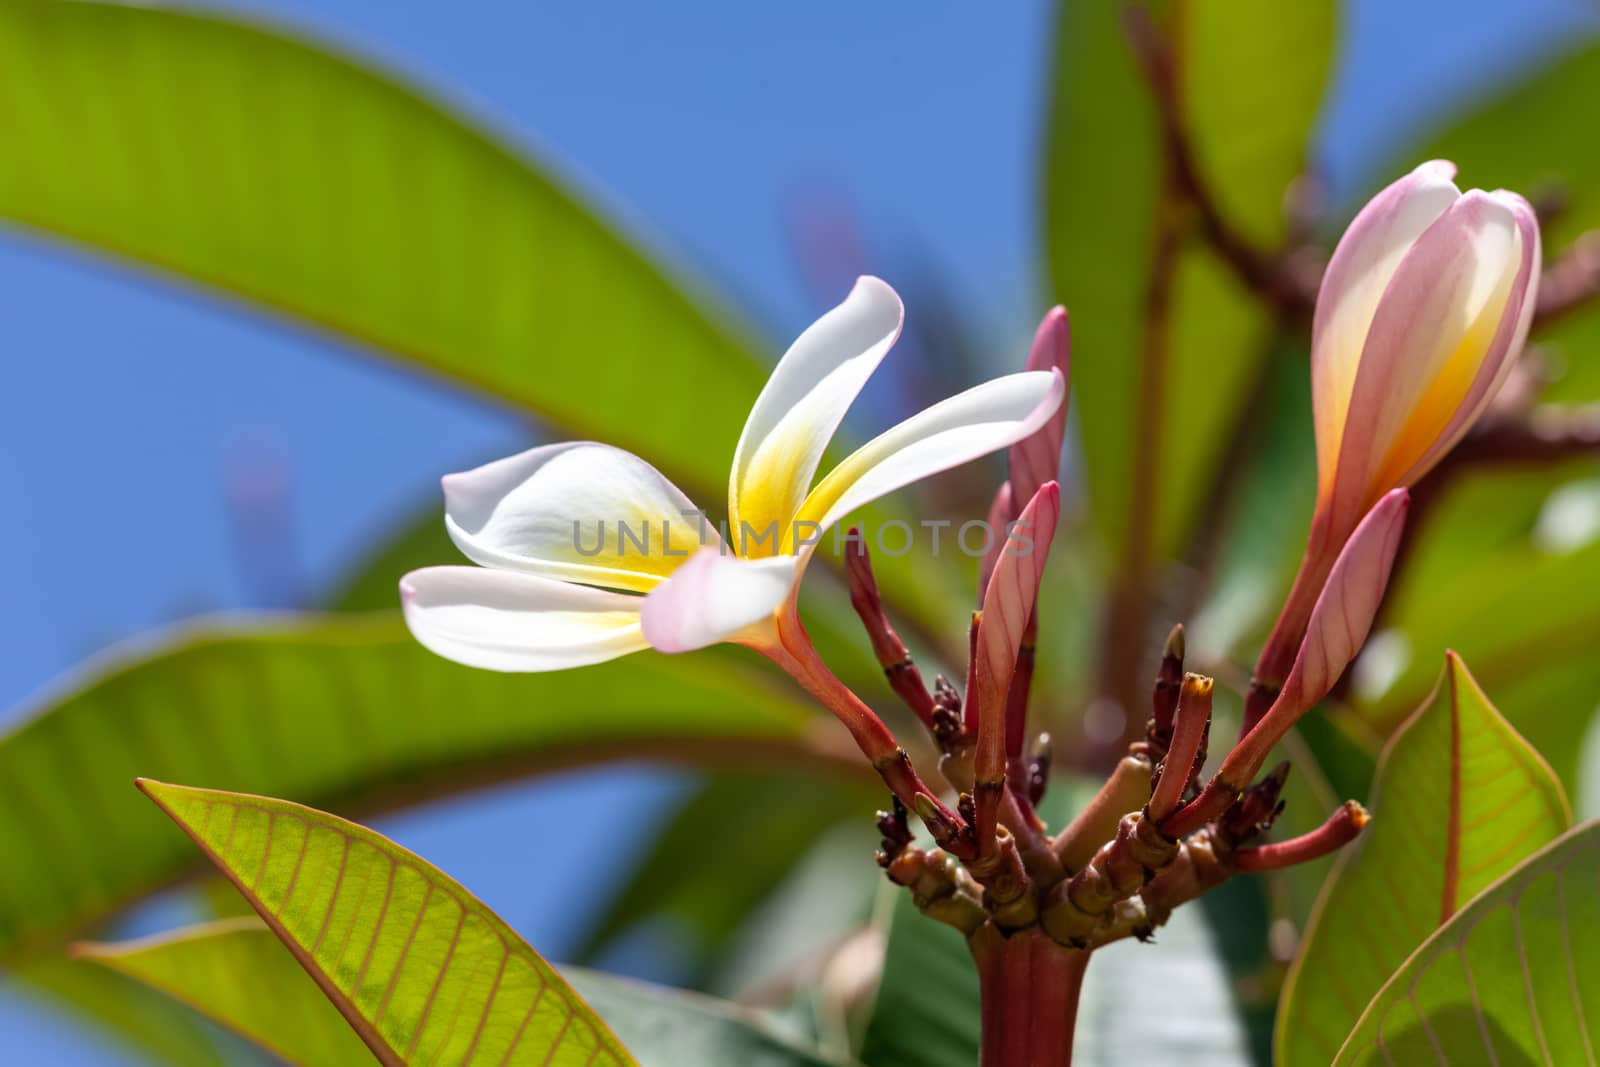 white and yellow frangipani flower by magann